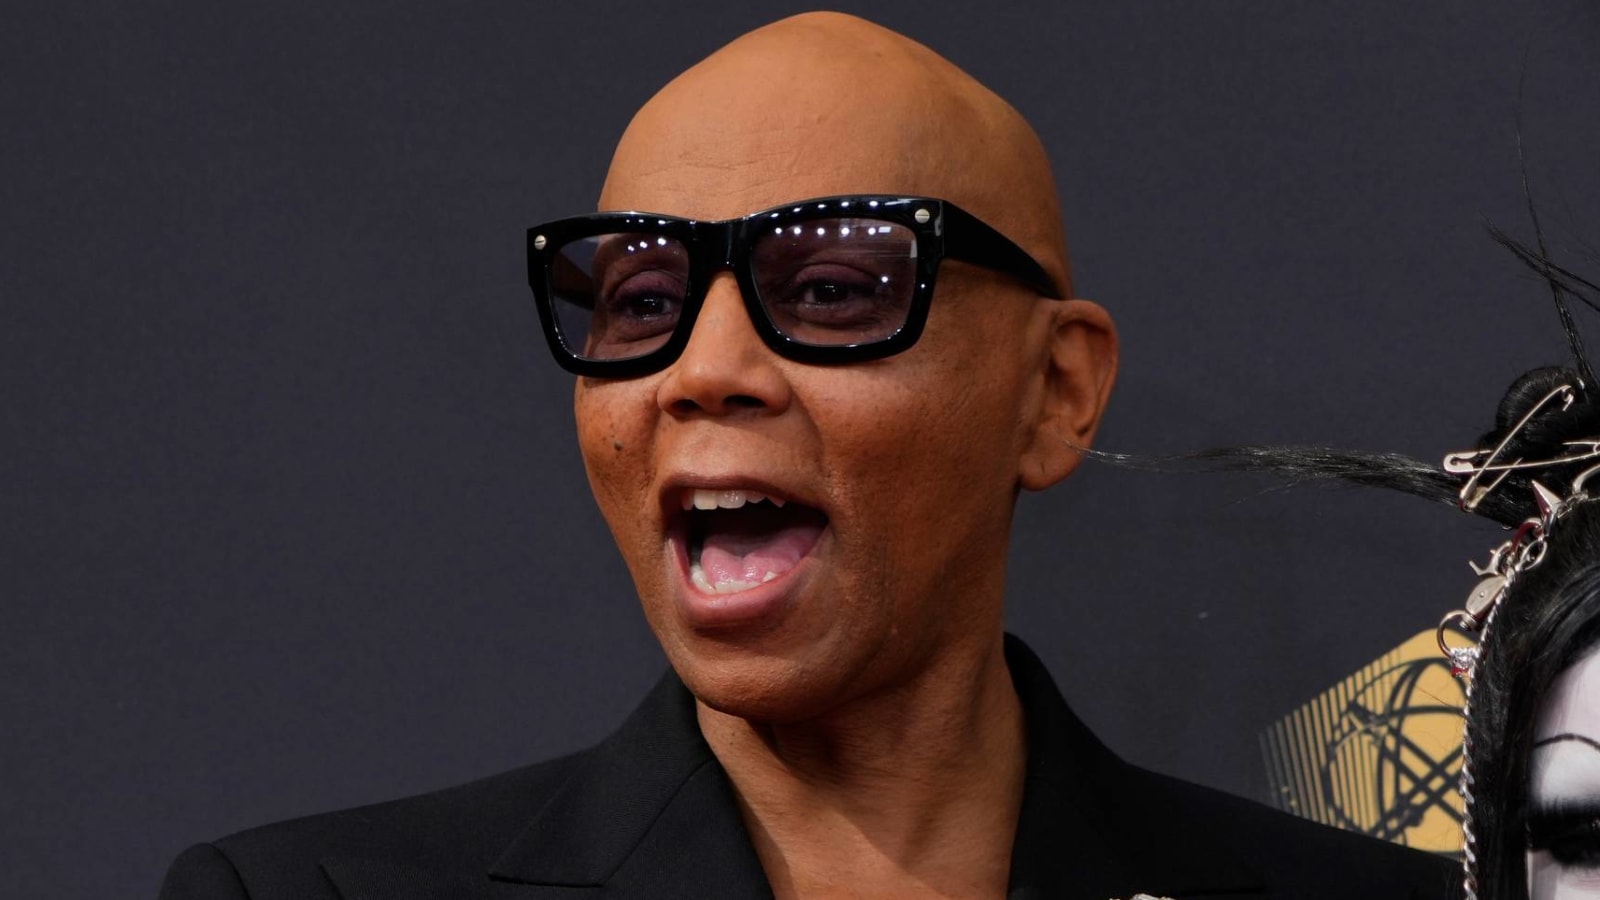 RuPaul makes Emmys history after 'RuPaul's Drag Race' claims best reality competition program